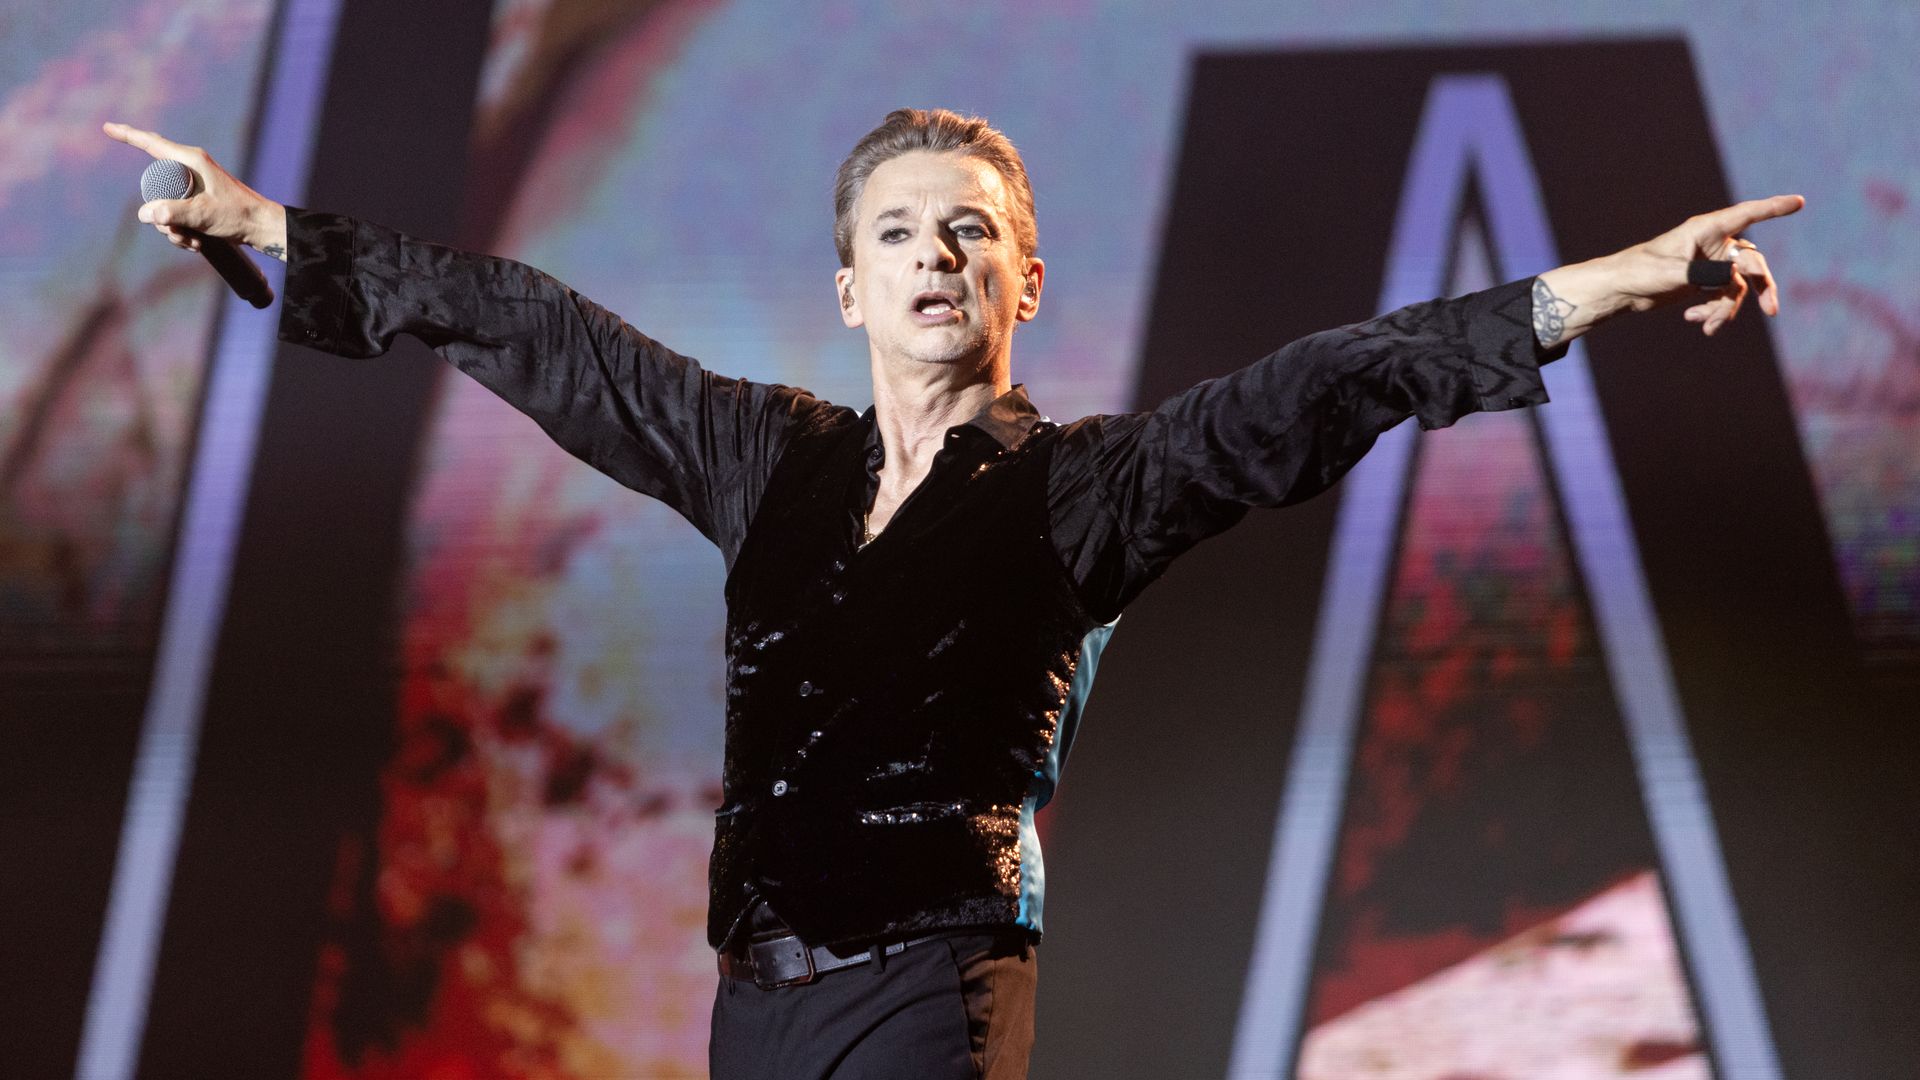 Depeche Mode's lead singer performs on stage. 